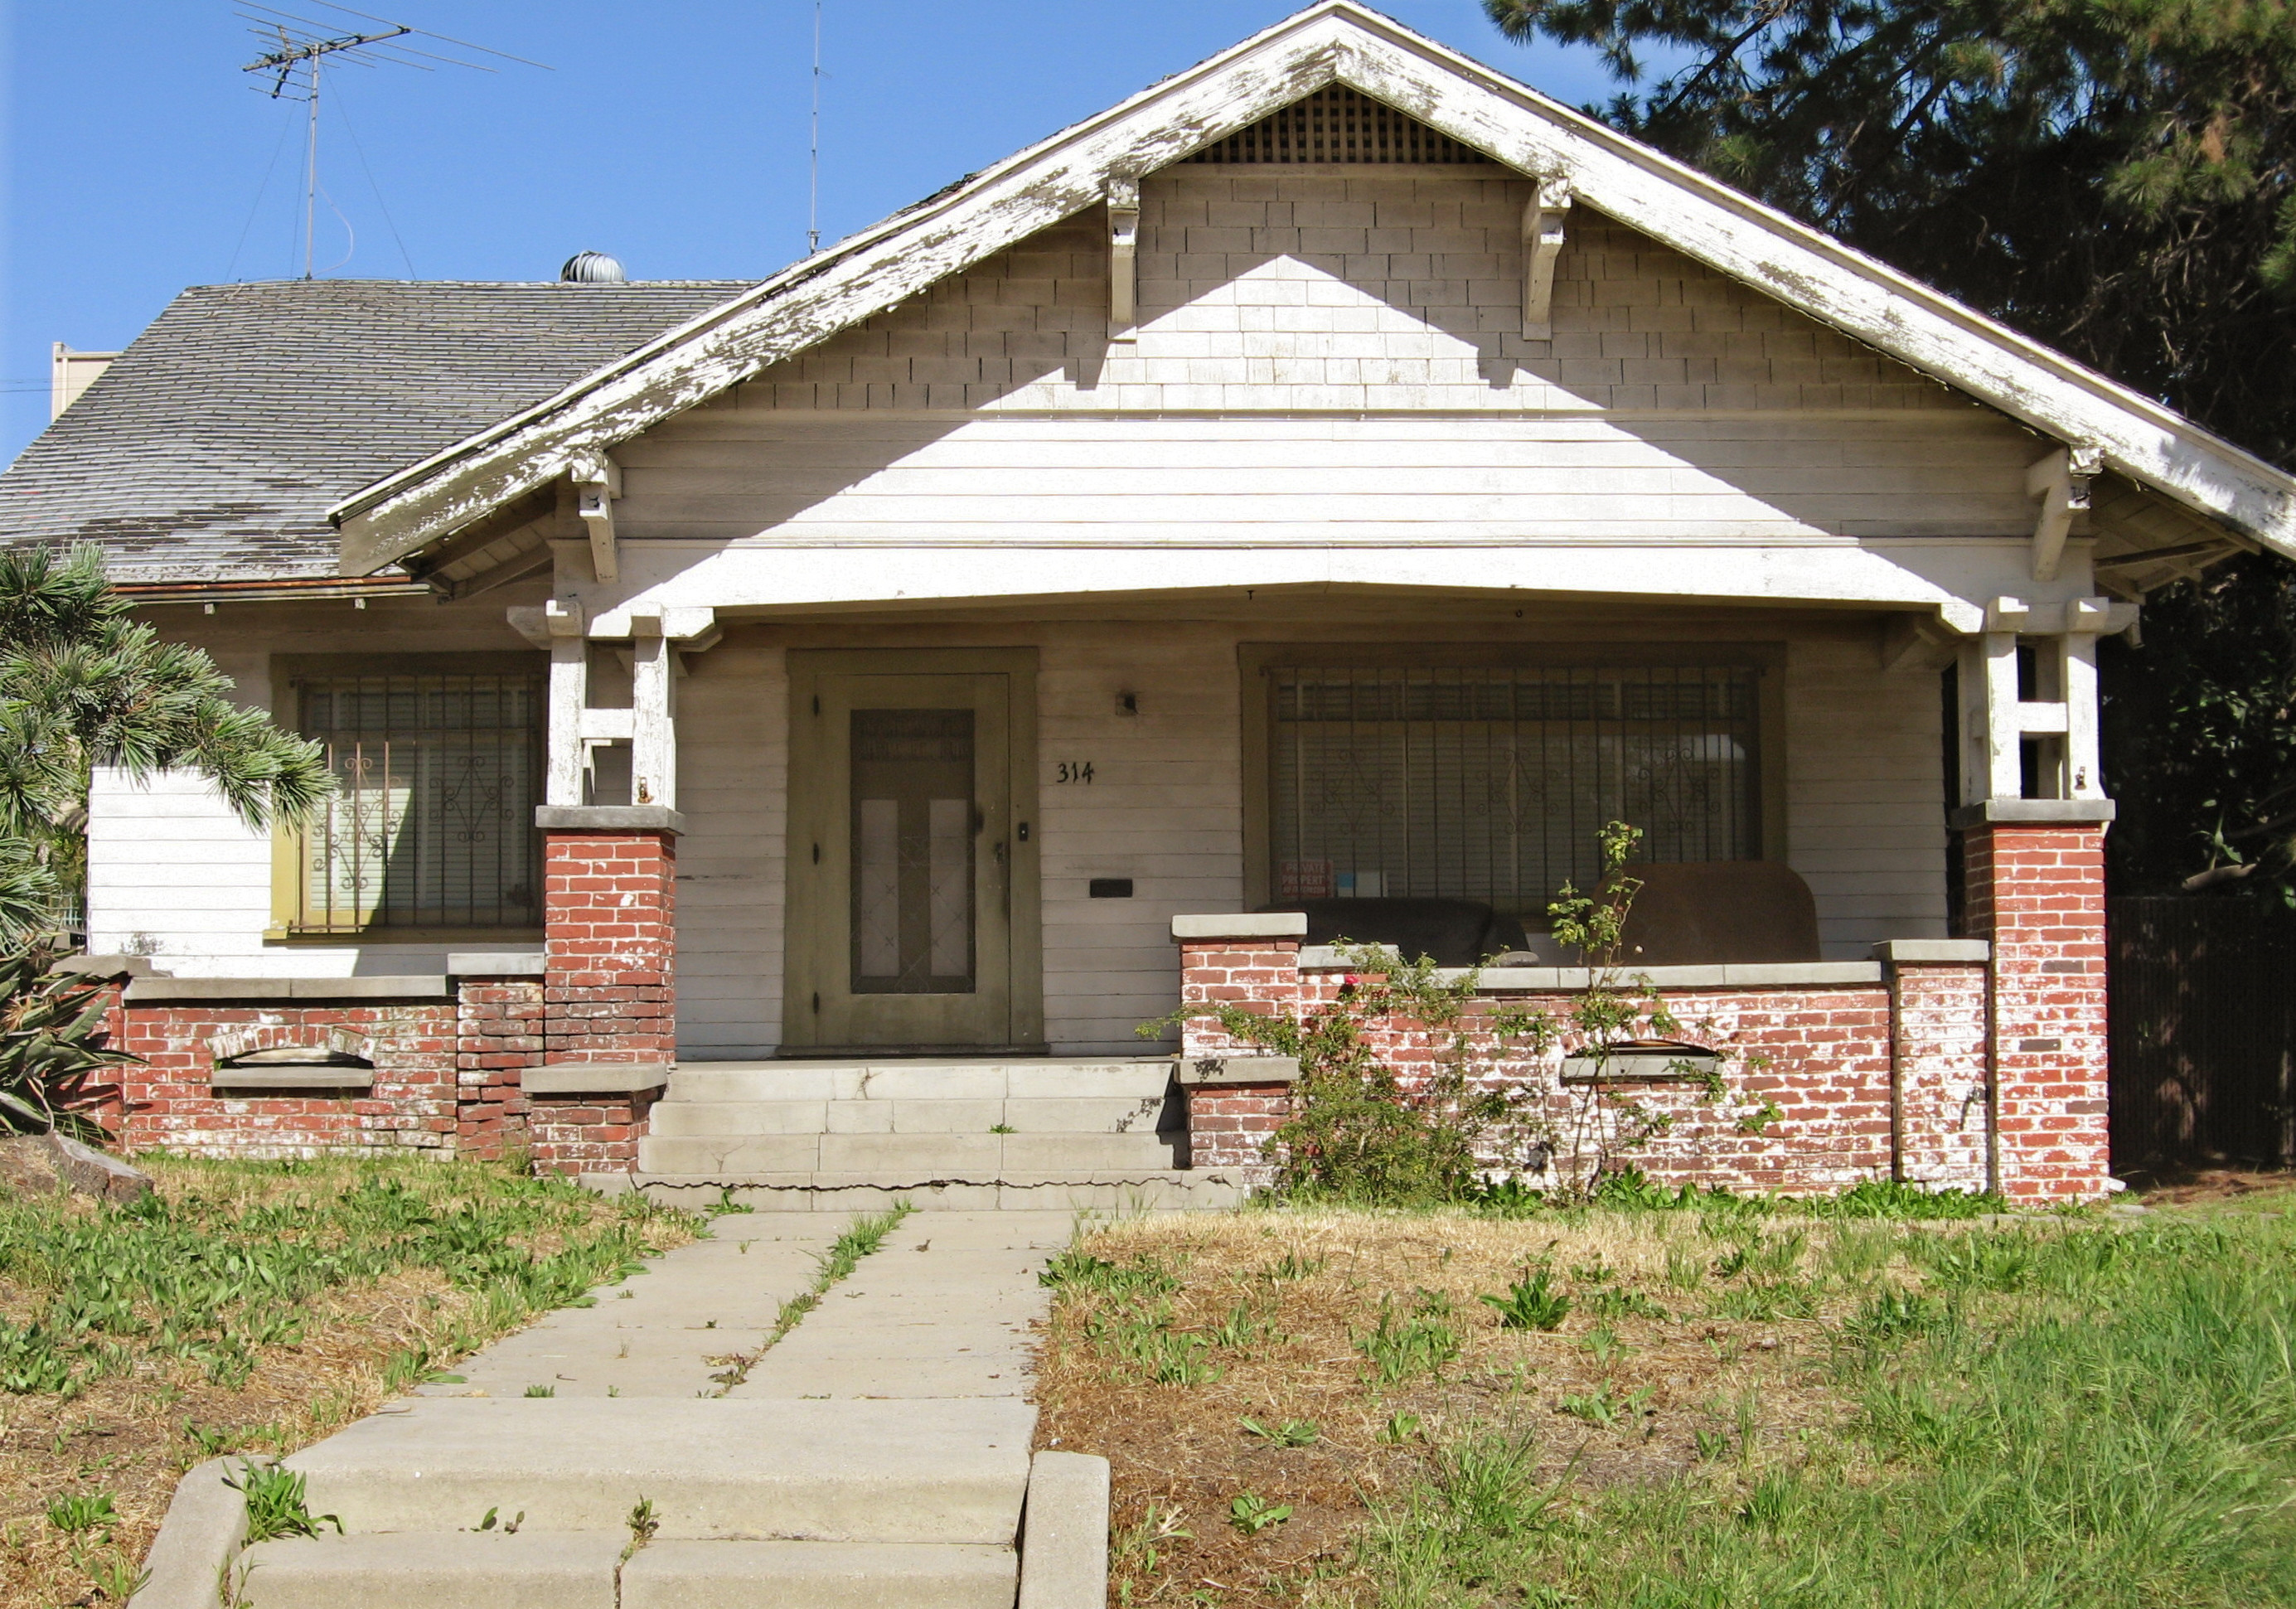 Sell your house fast Sacramento